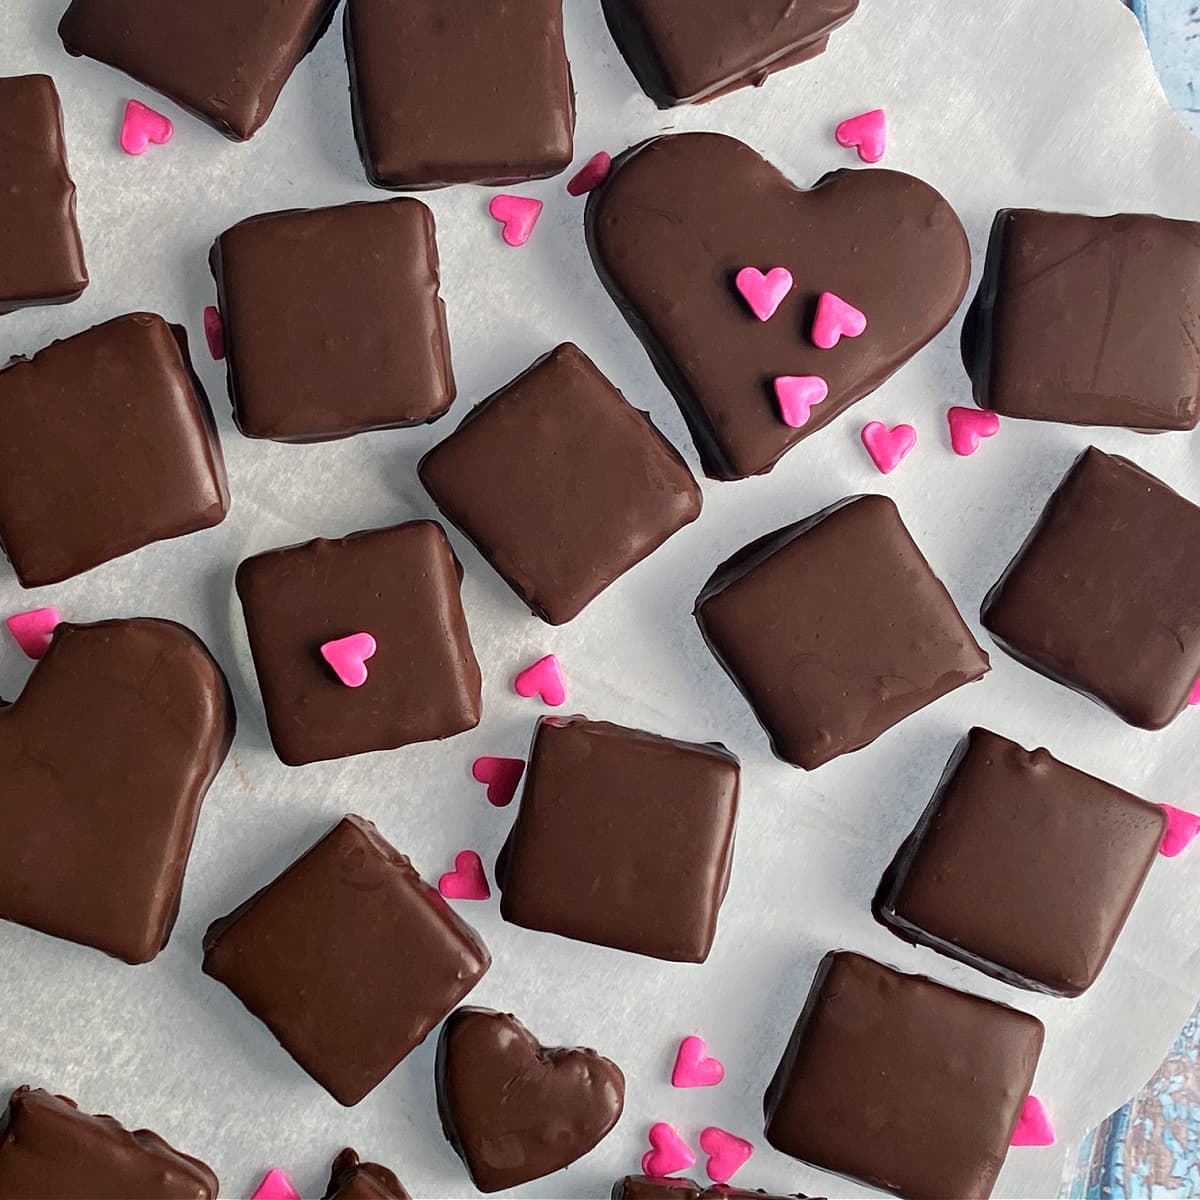 Dipped Bavarian mint chocolates on parchment, with small pink hearts sprinkled around for color. 